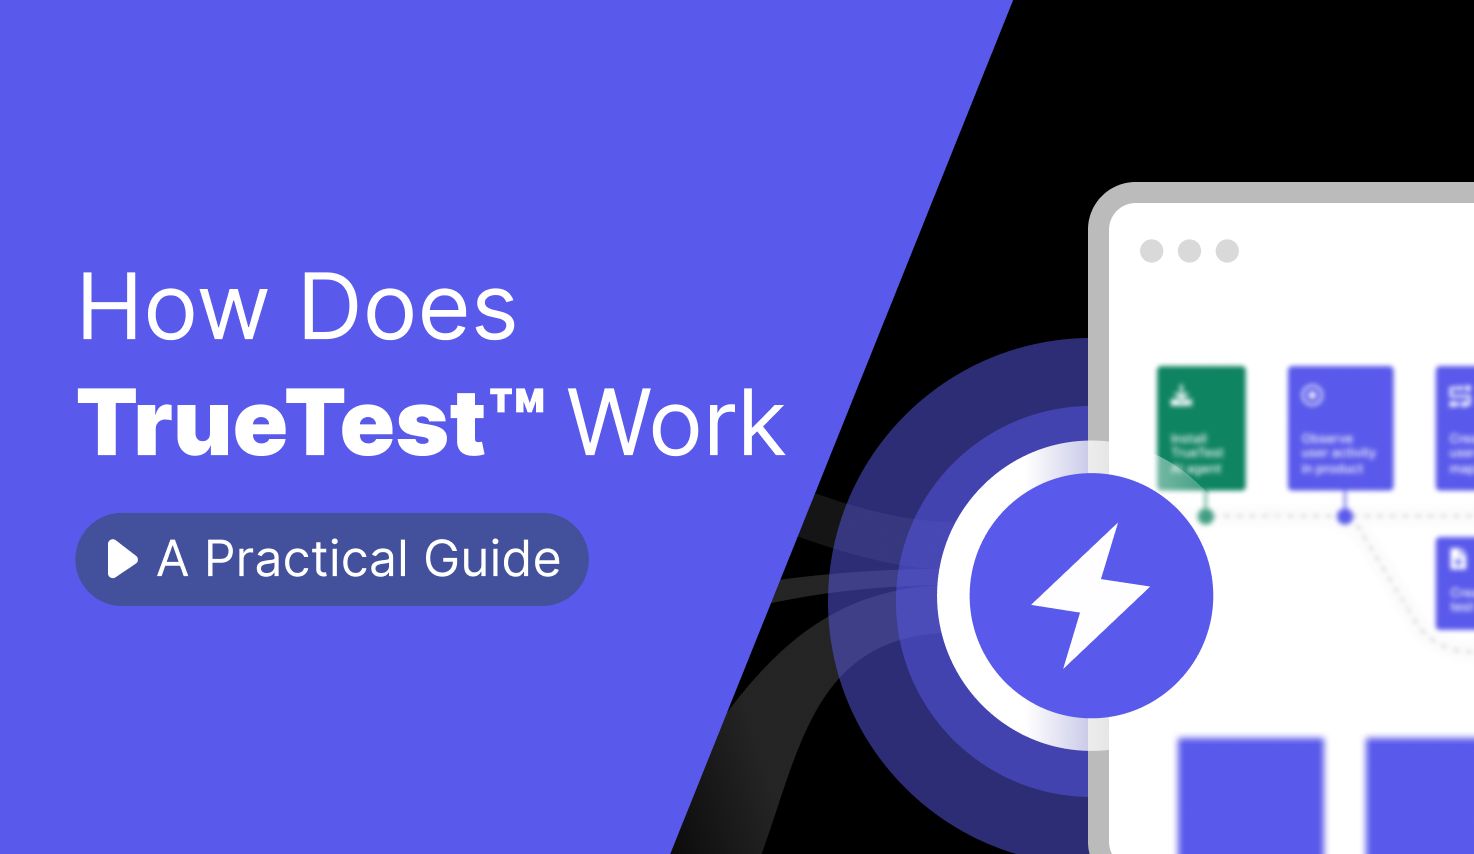 How does TrueTest work